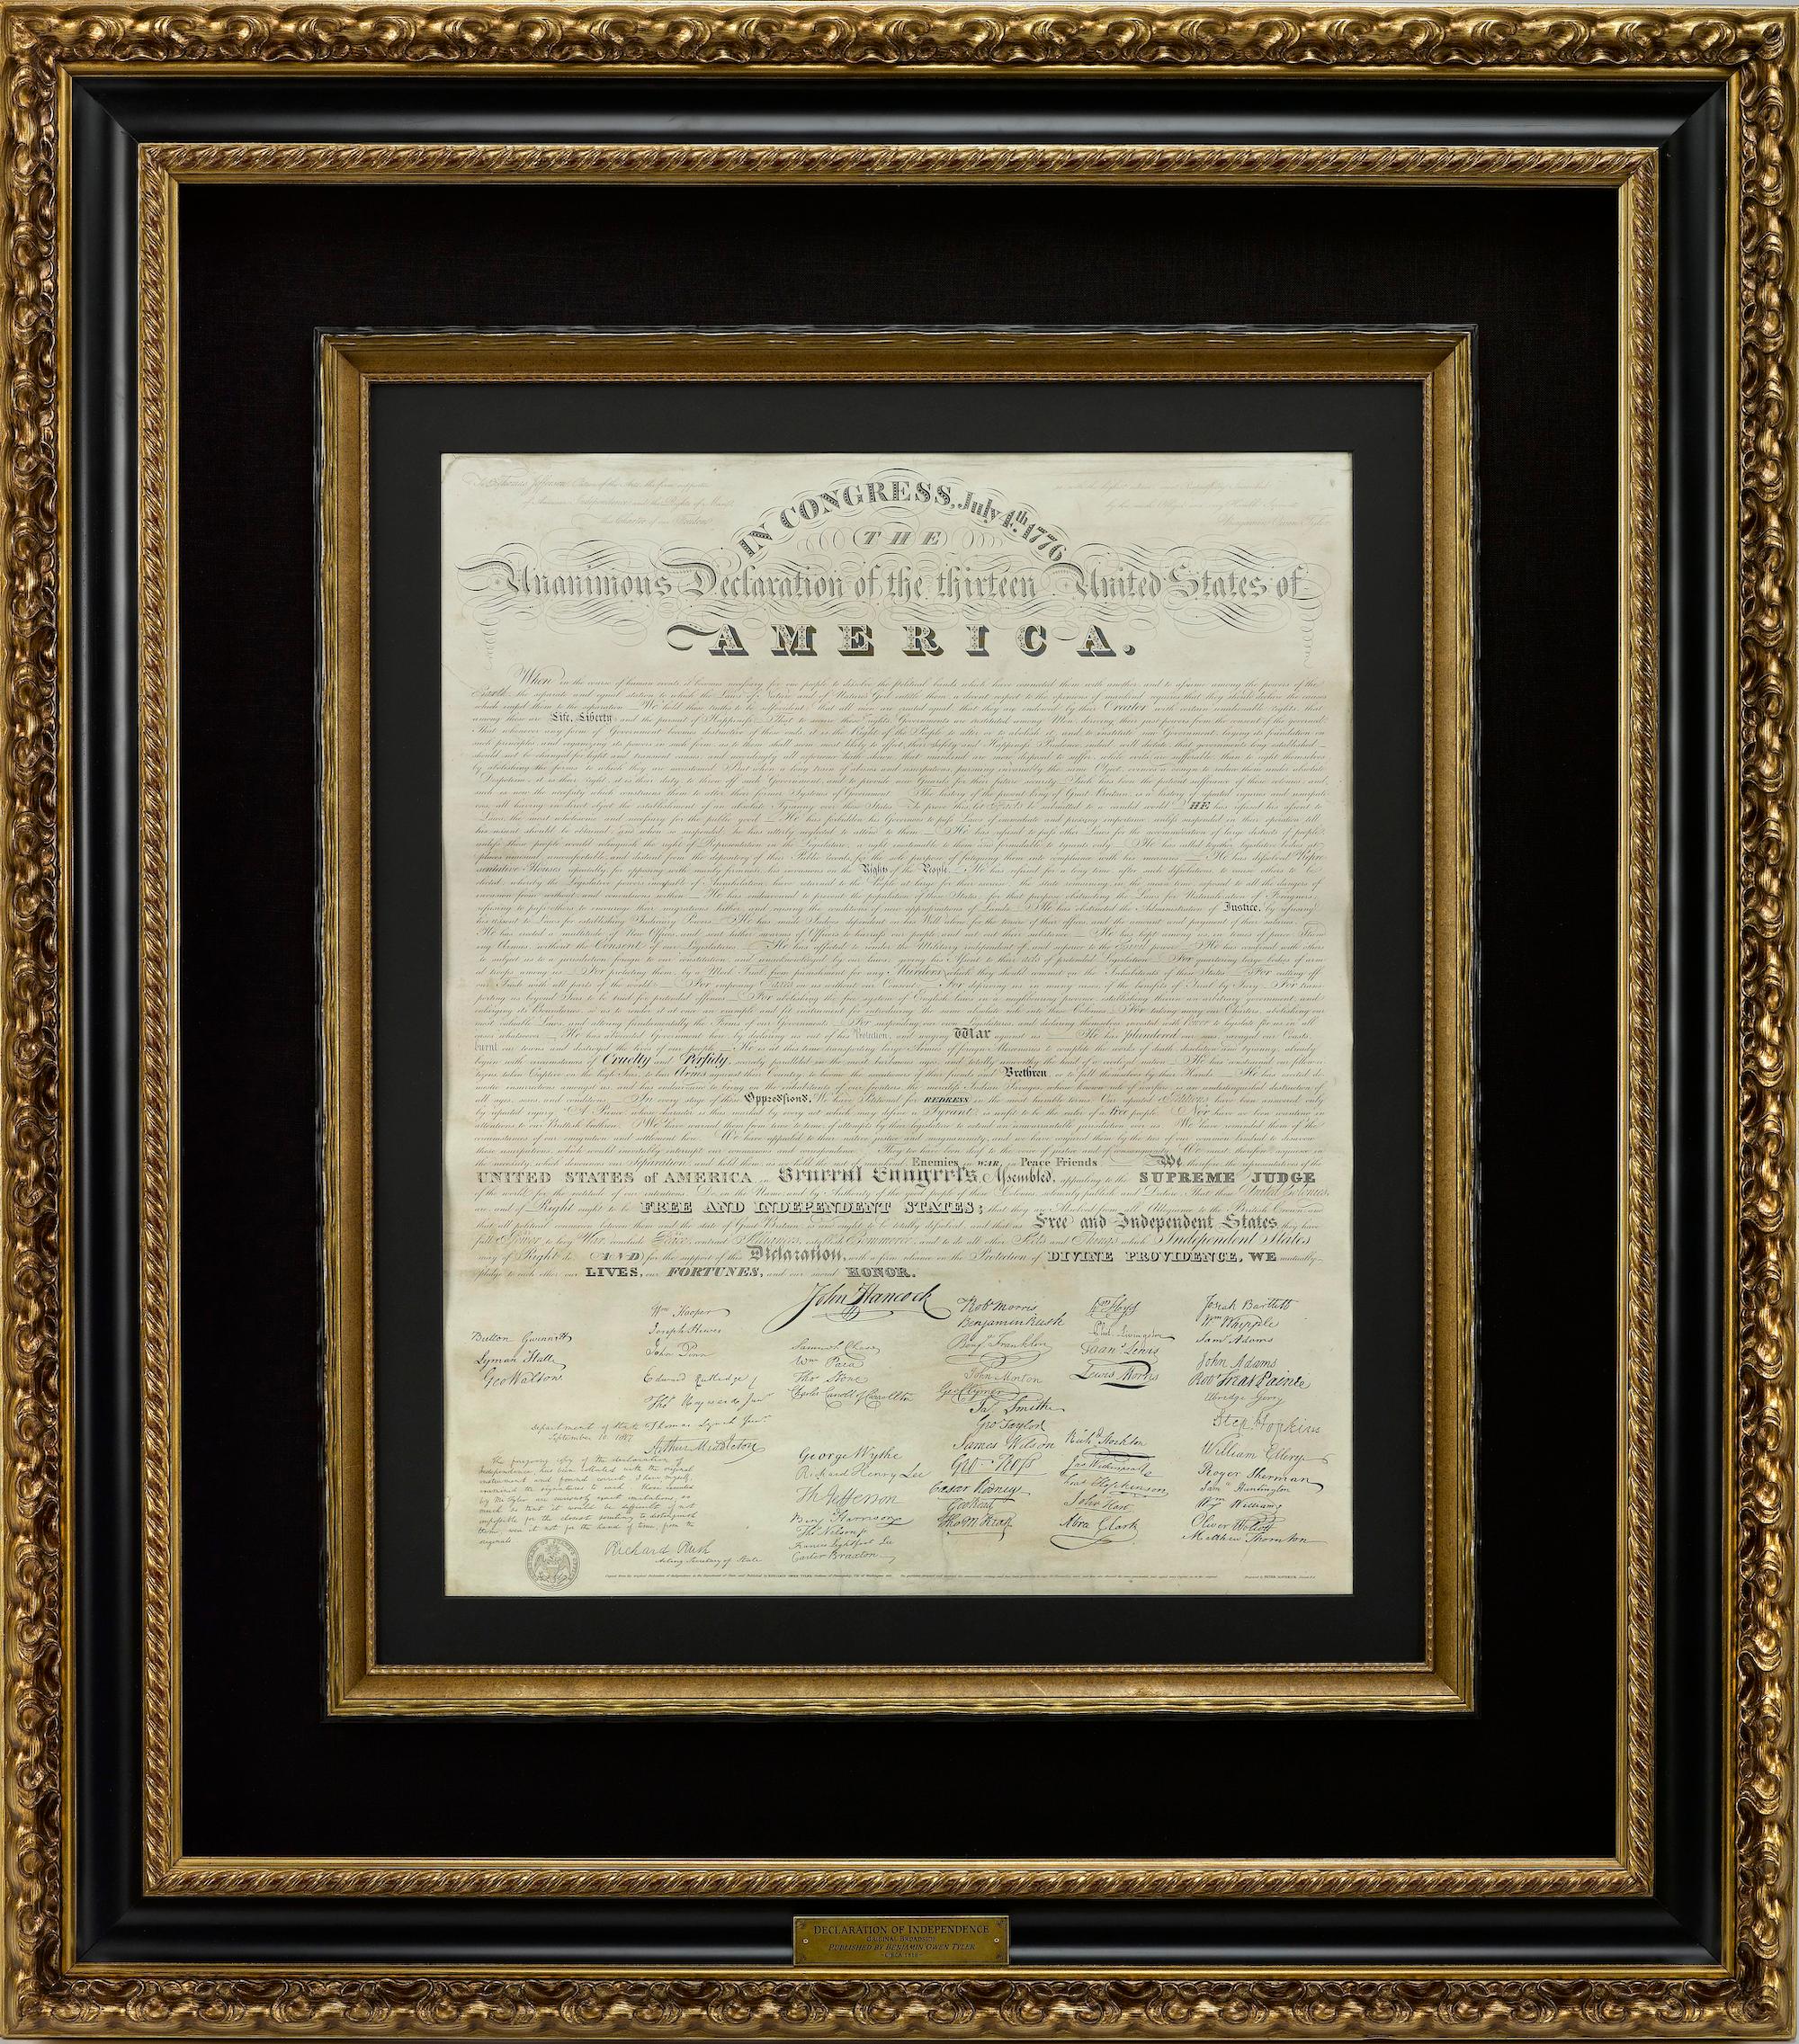 Early 19th Century 1818 Declaration of Independence Broadside Engraved by Benjamin Owen Tyler